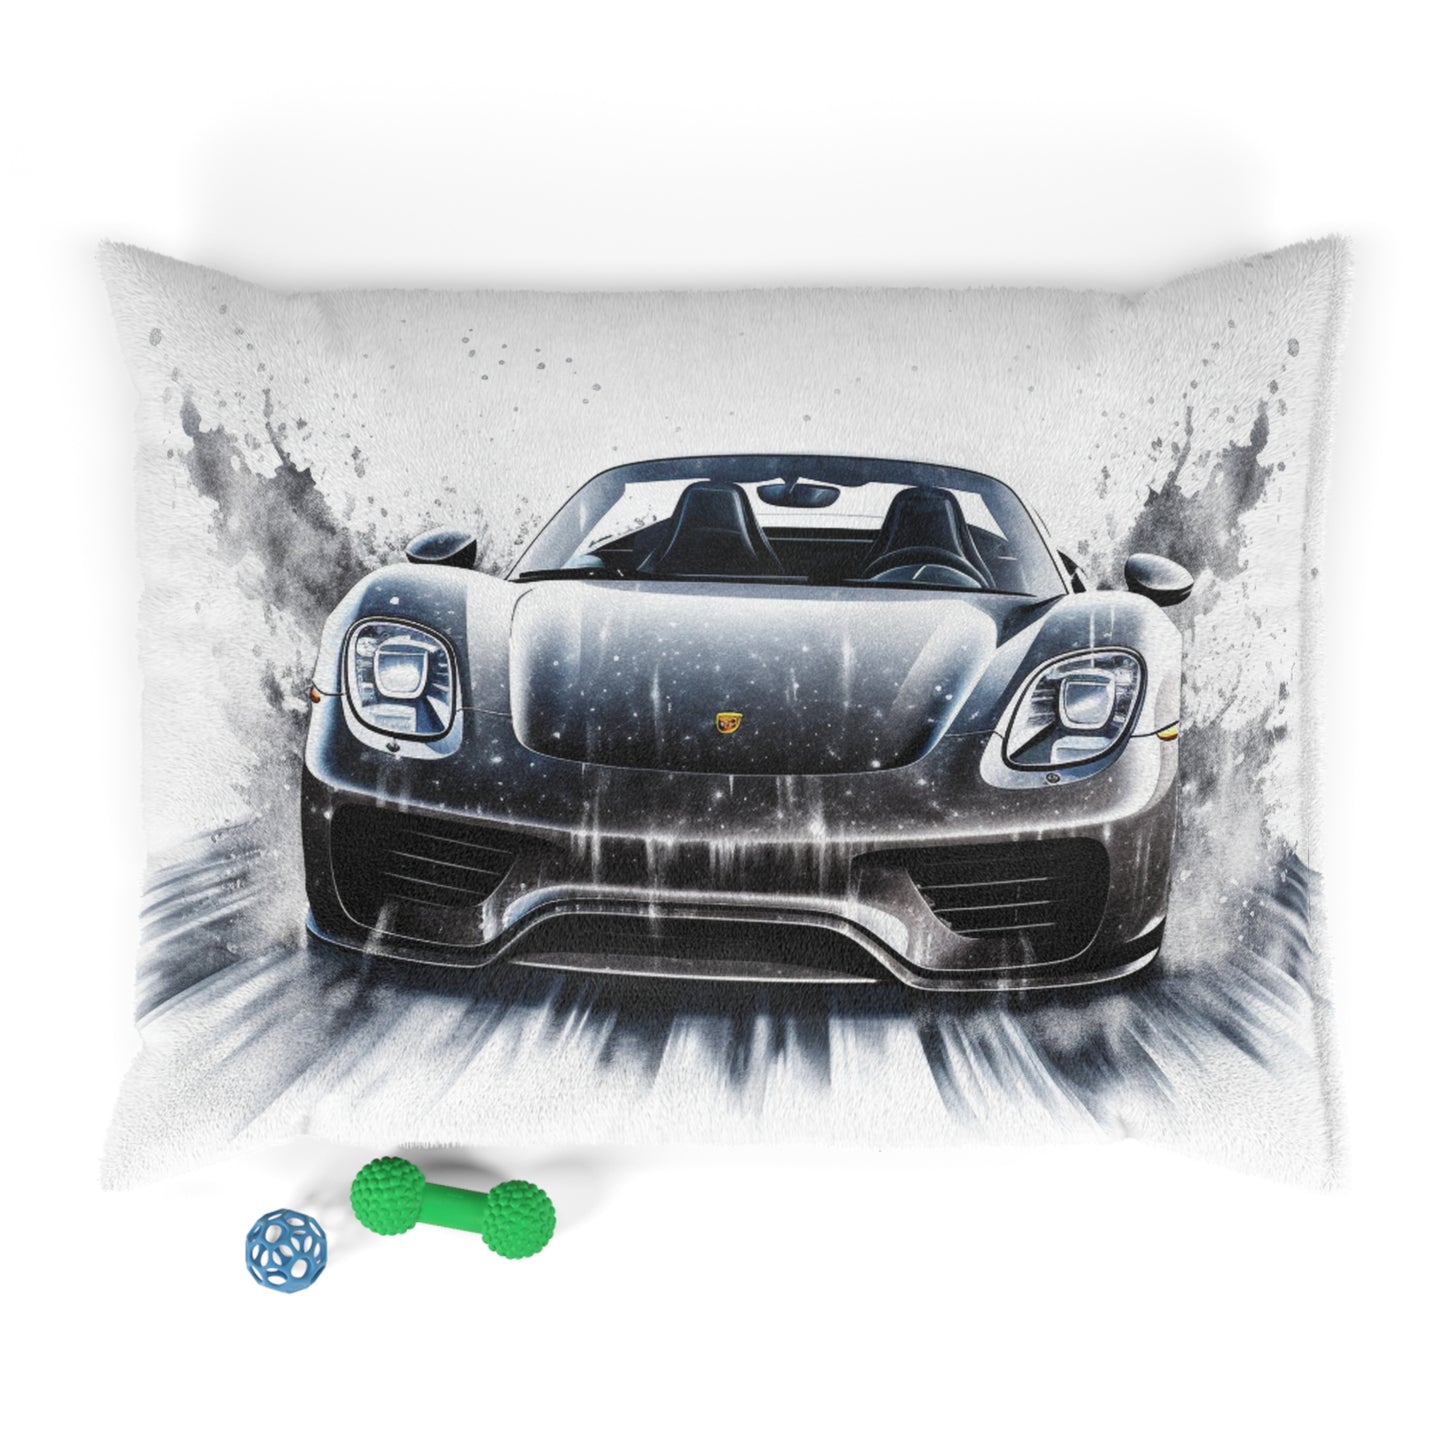 Pet Bed 918 Spyder white background driving fast with water splashing 3